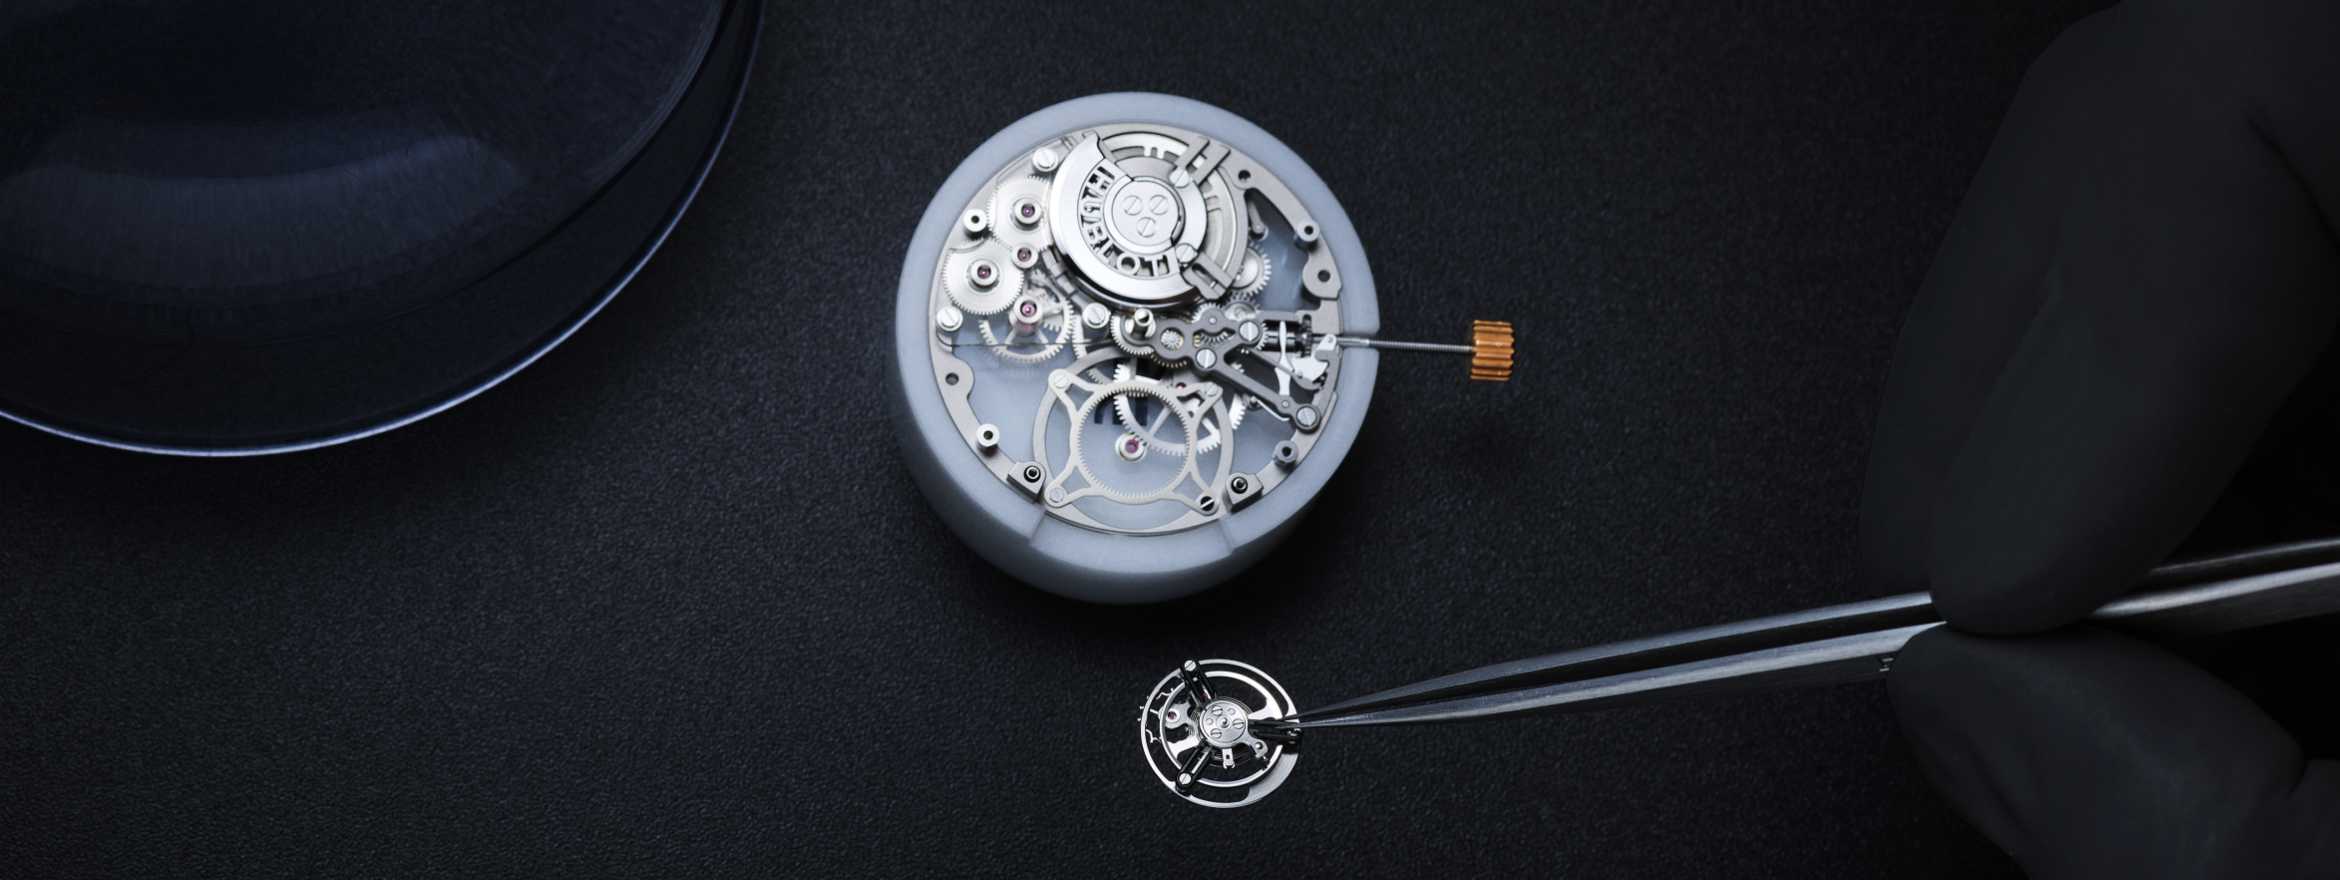 Evolution of Complicated Watchmaking at Hublot - The Hour Glass